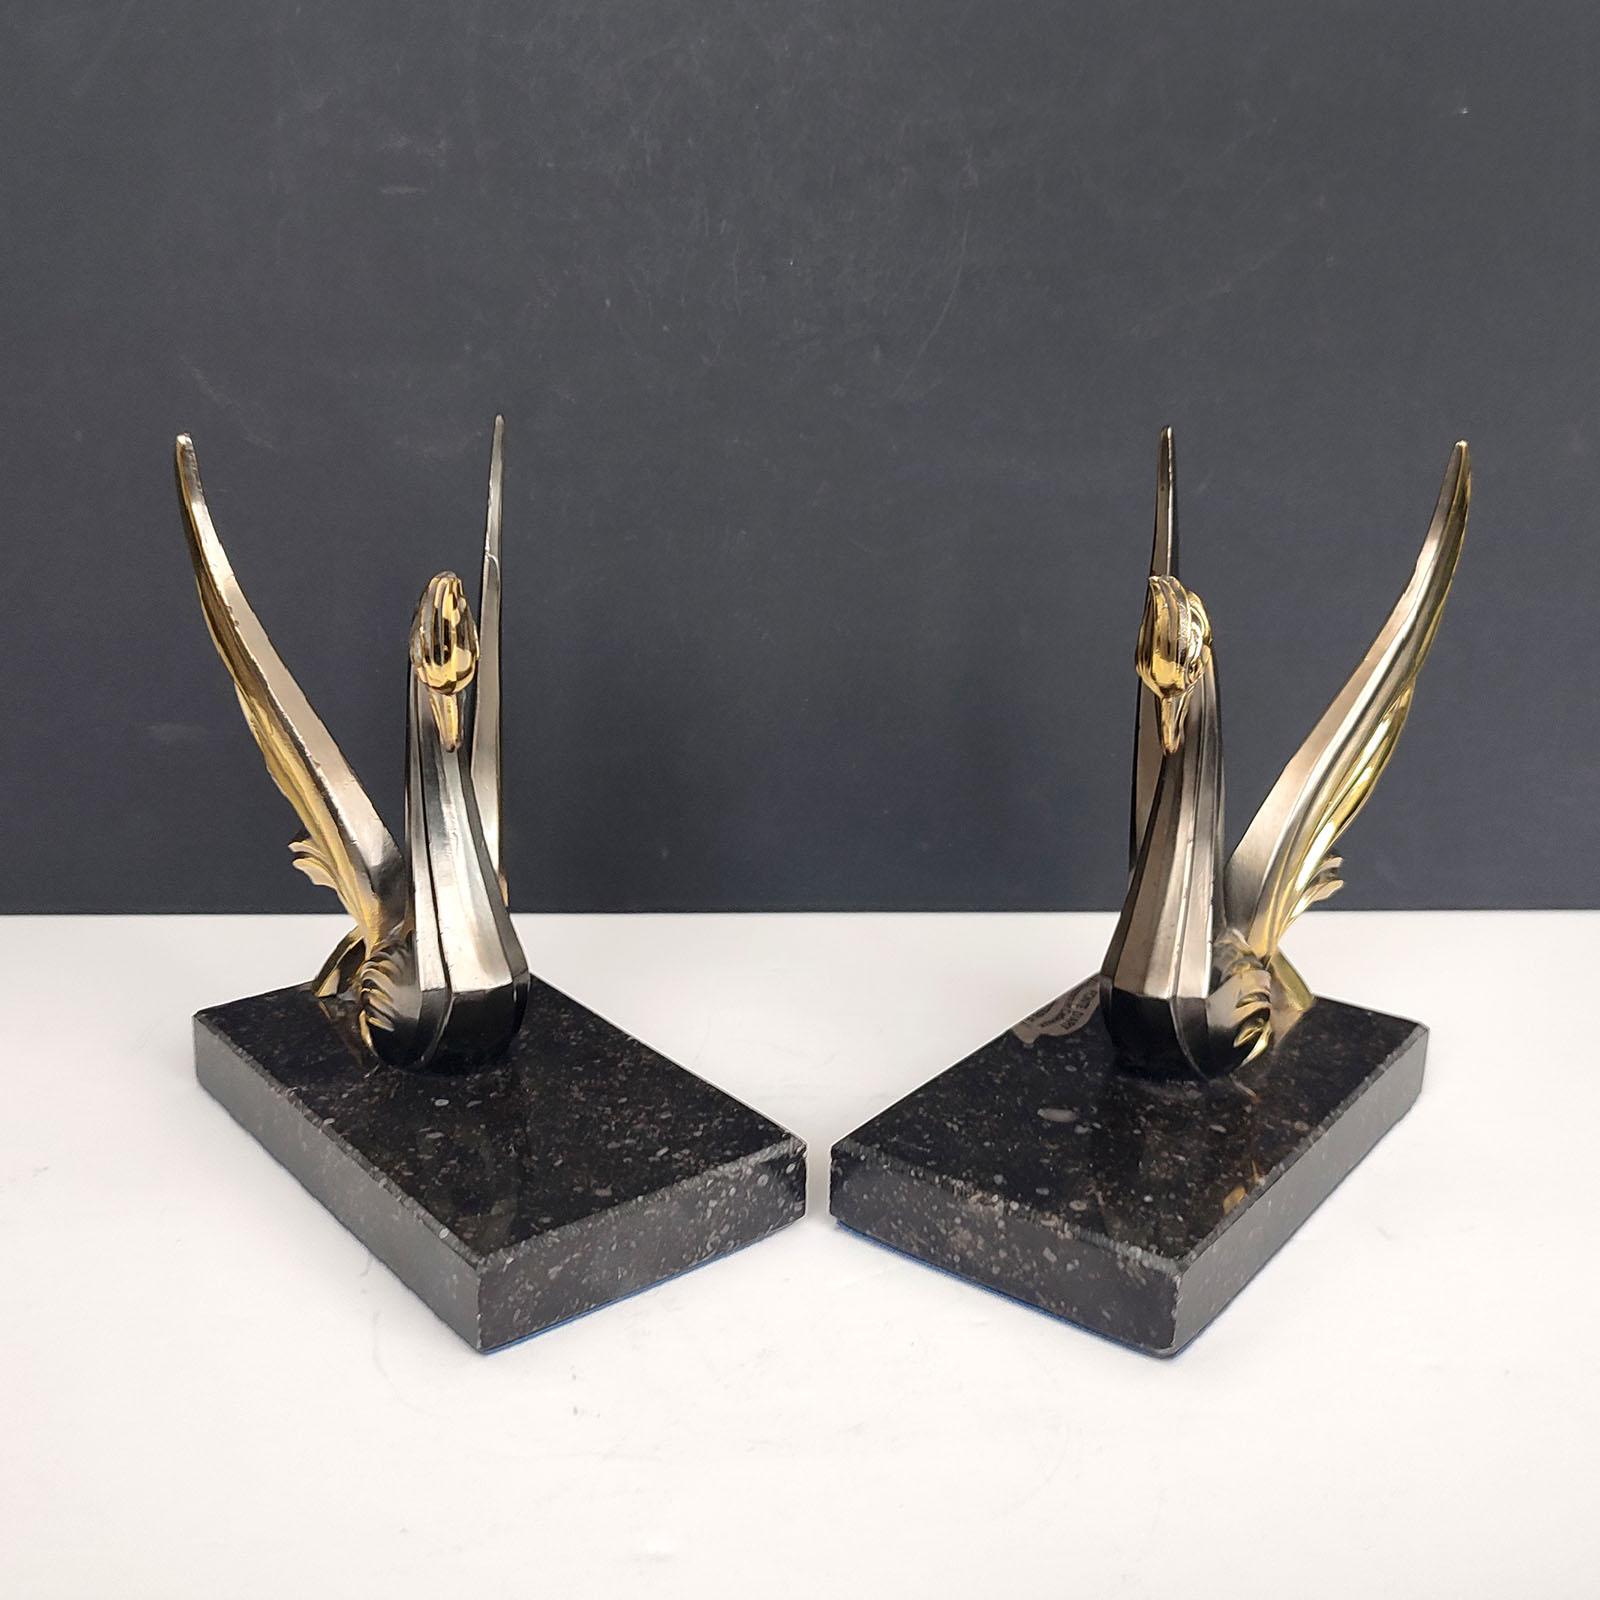 Patinated Vintage Pair of Art Deco Swan Bookends, circa 1950